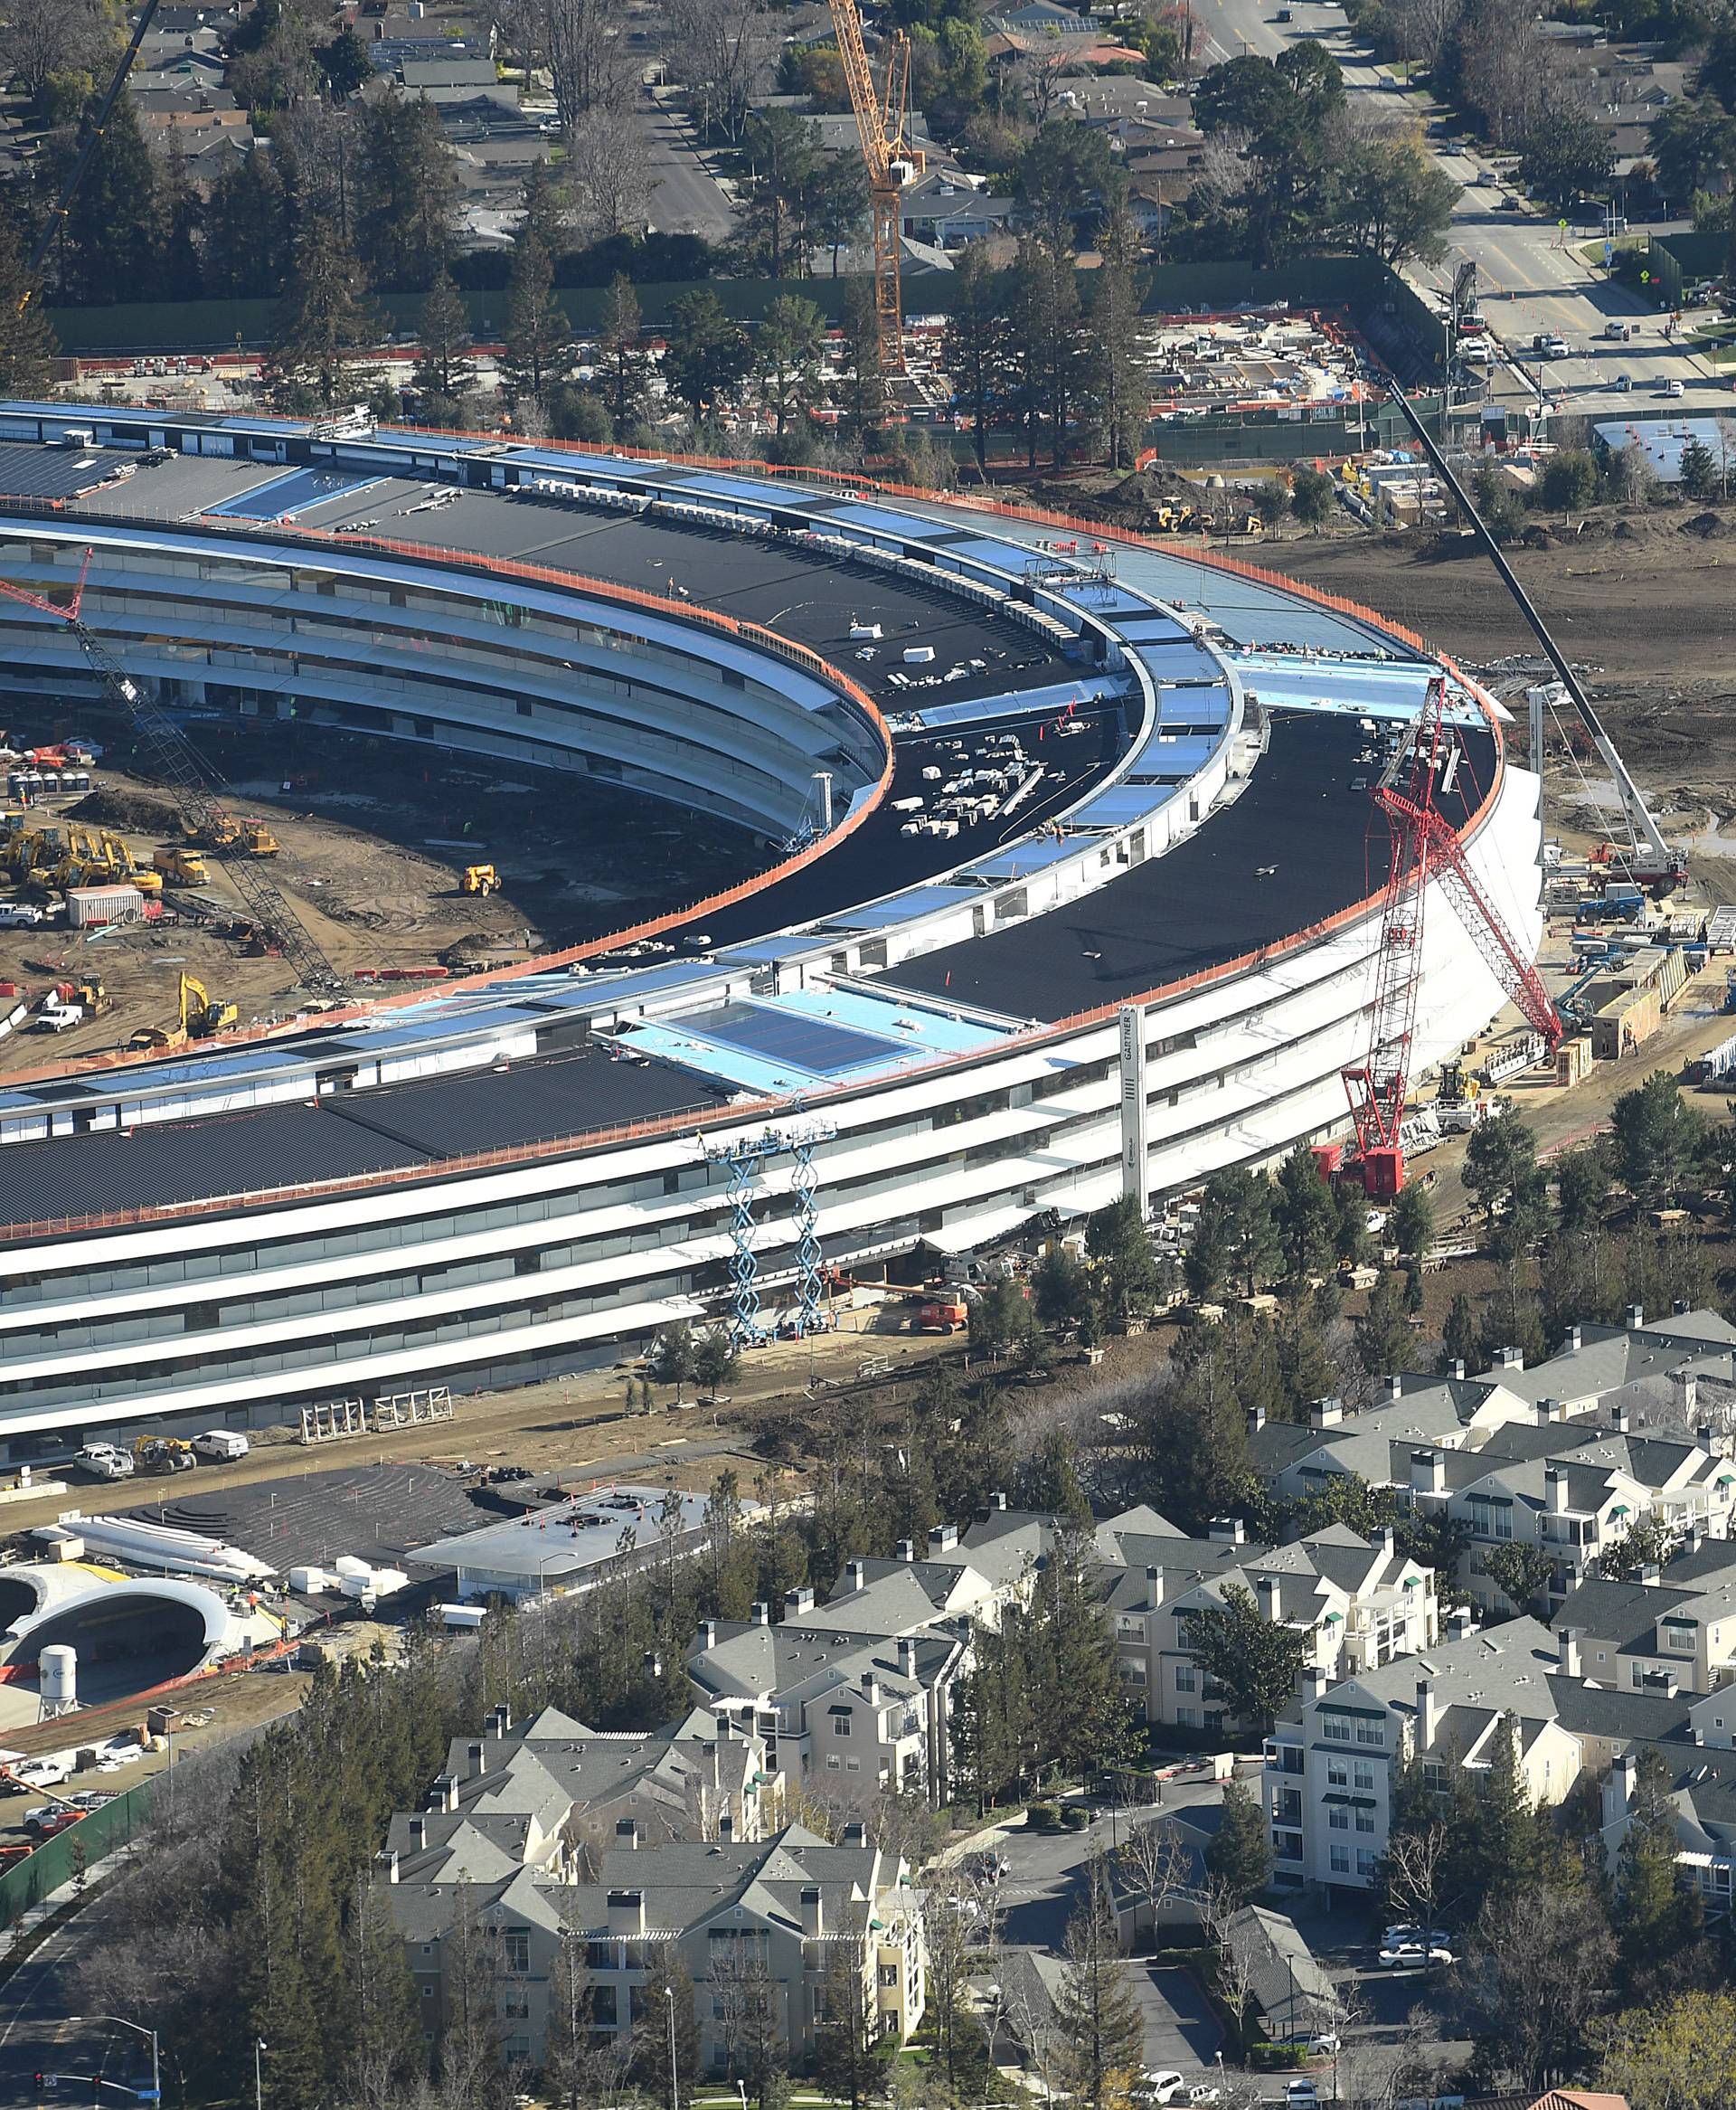 The Apple Campus 2 is seen under construction in Cupertino